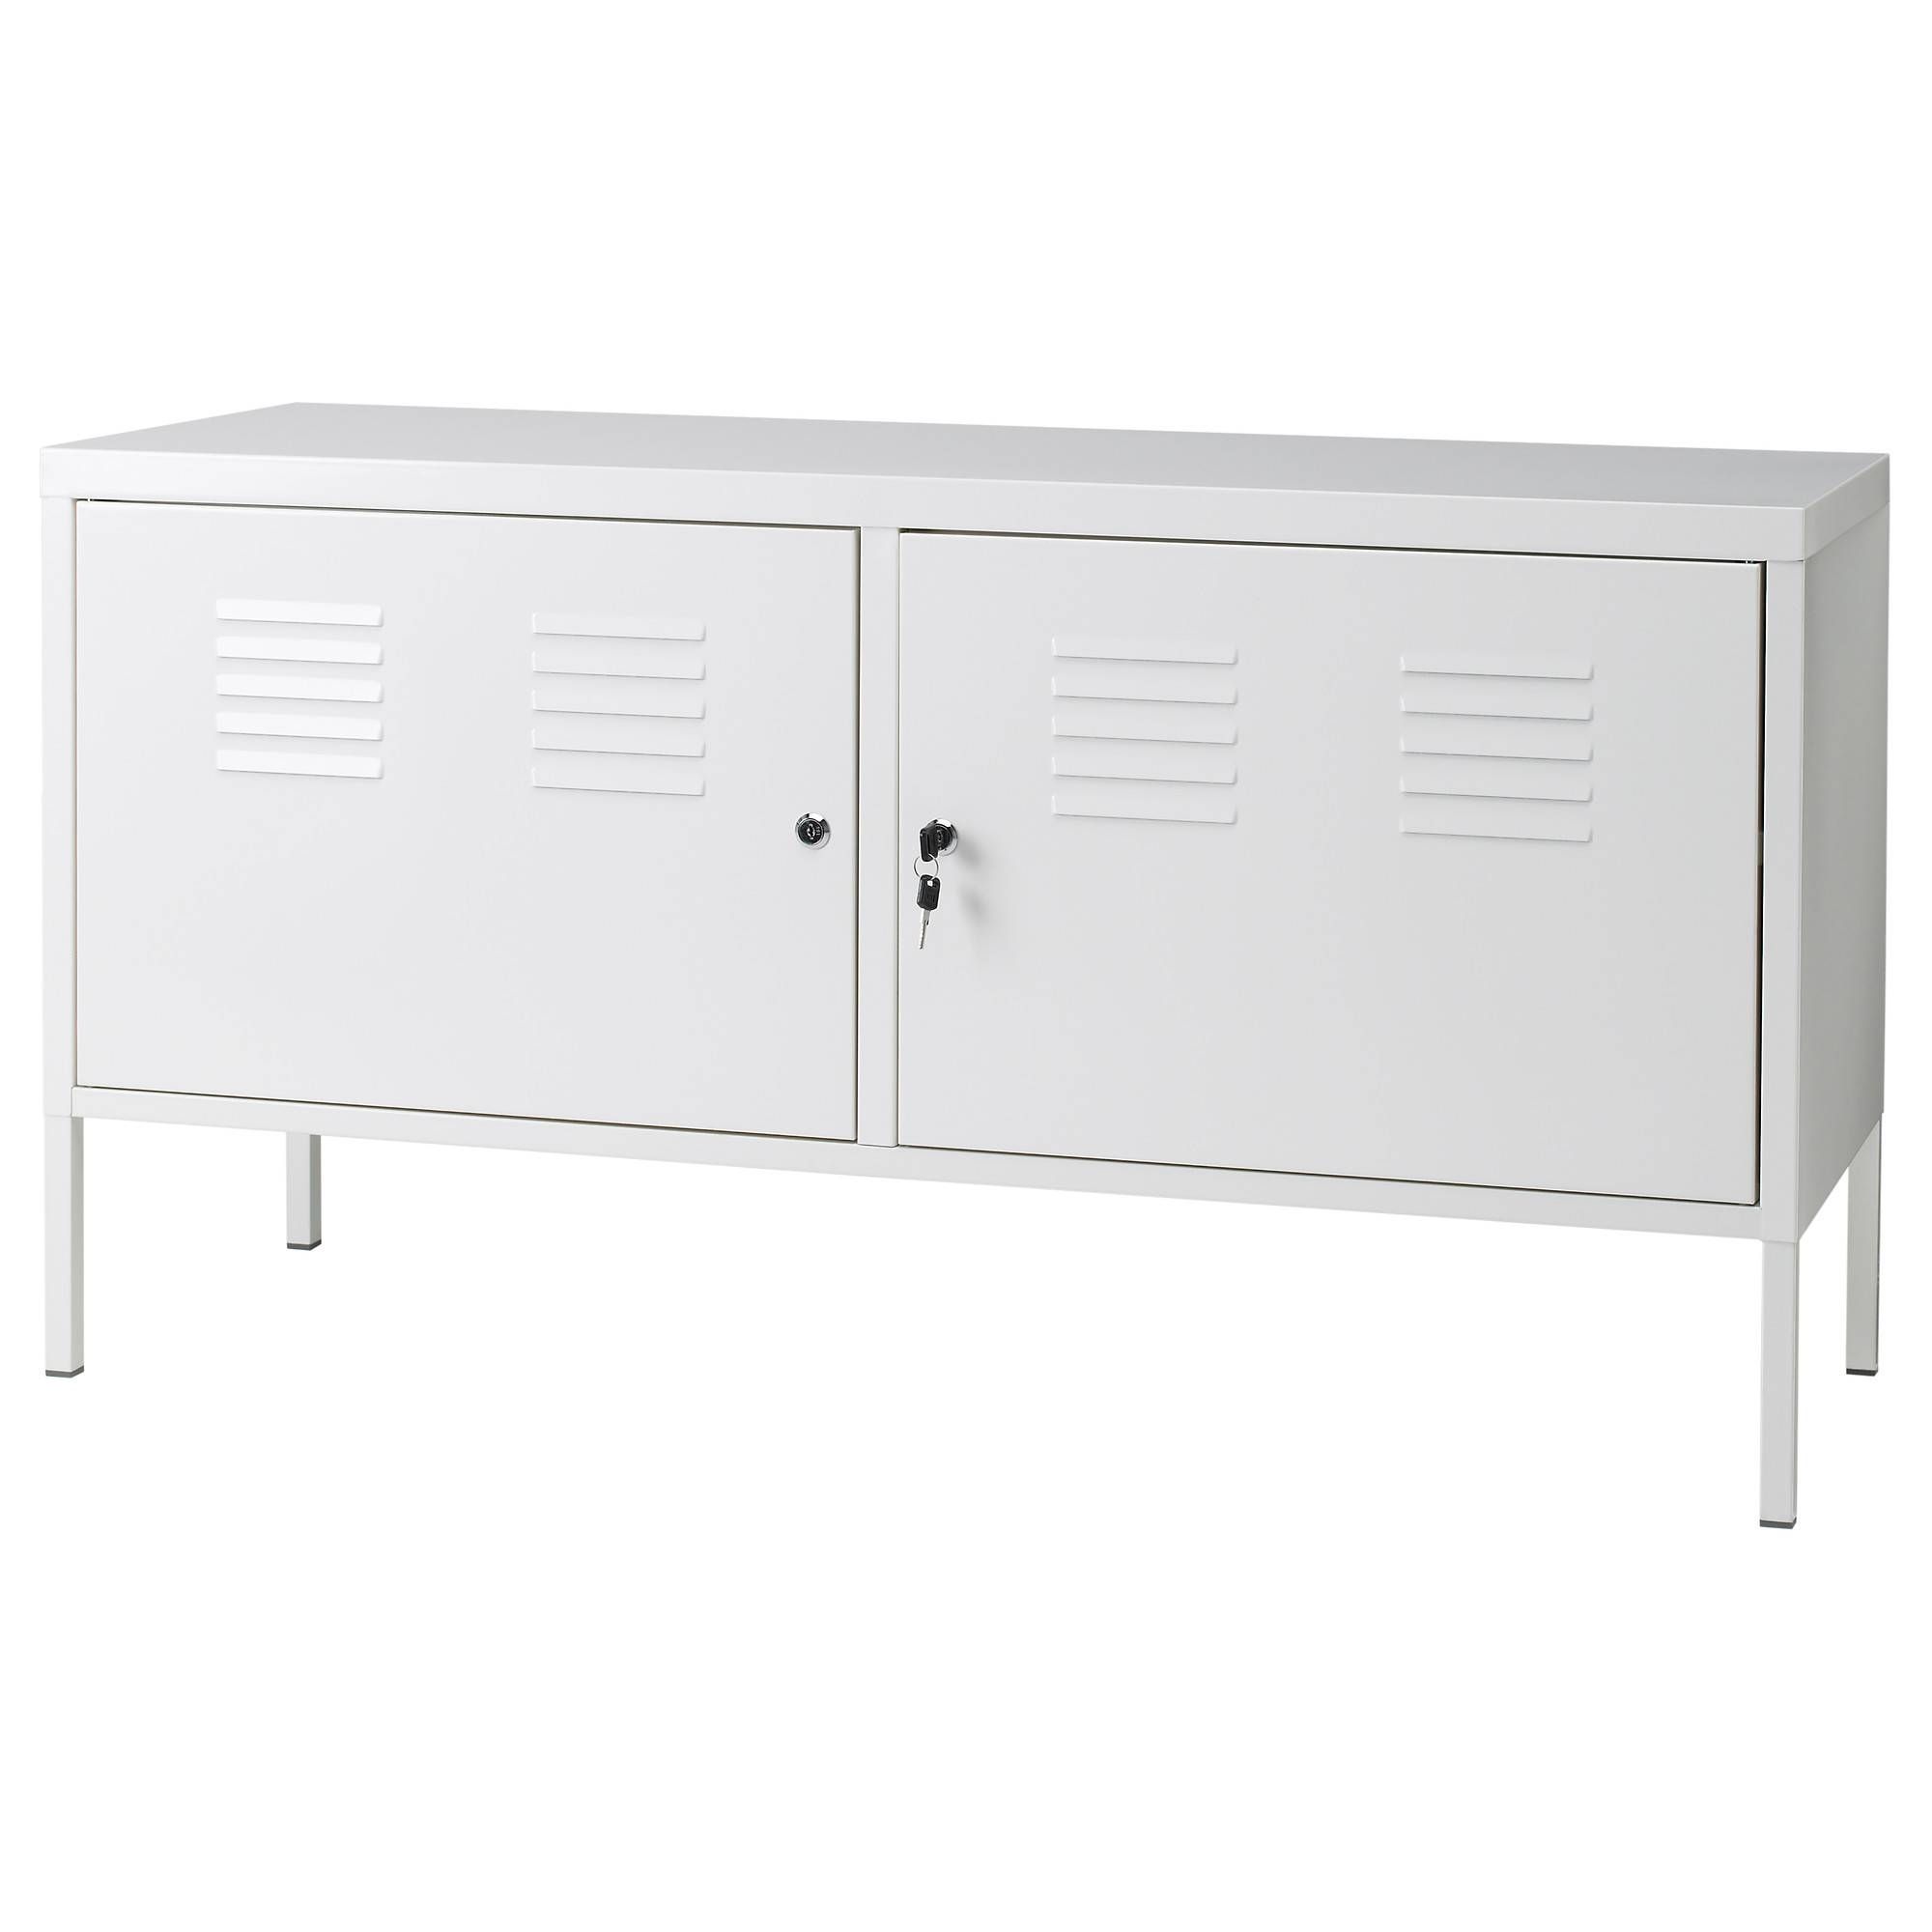 Ikea Ps Cabinet – White – Ikea Intended For Sideboard Cabinets (View 9 of 15)